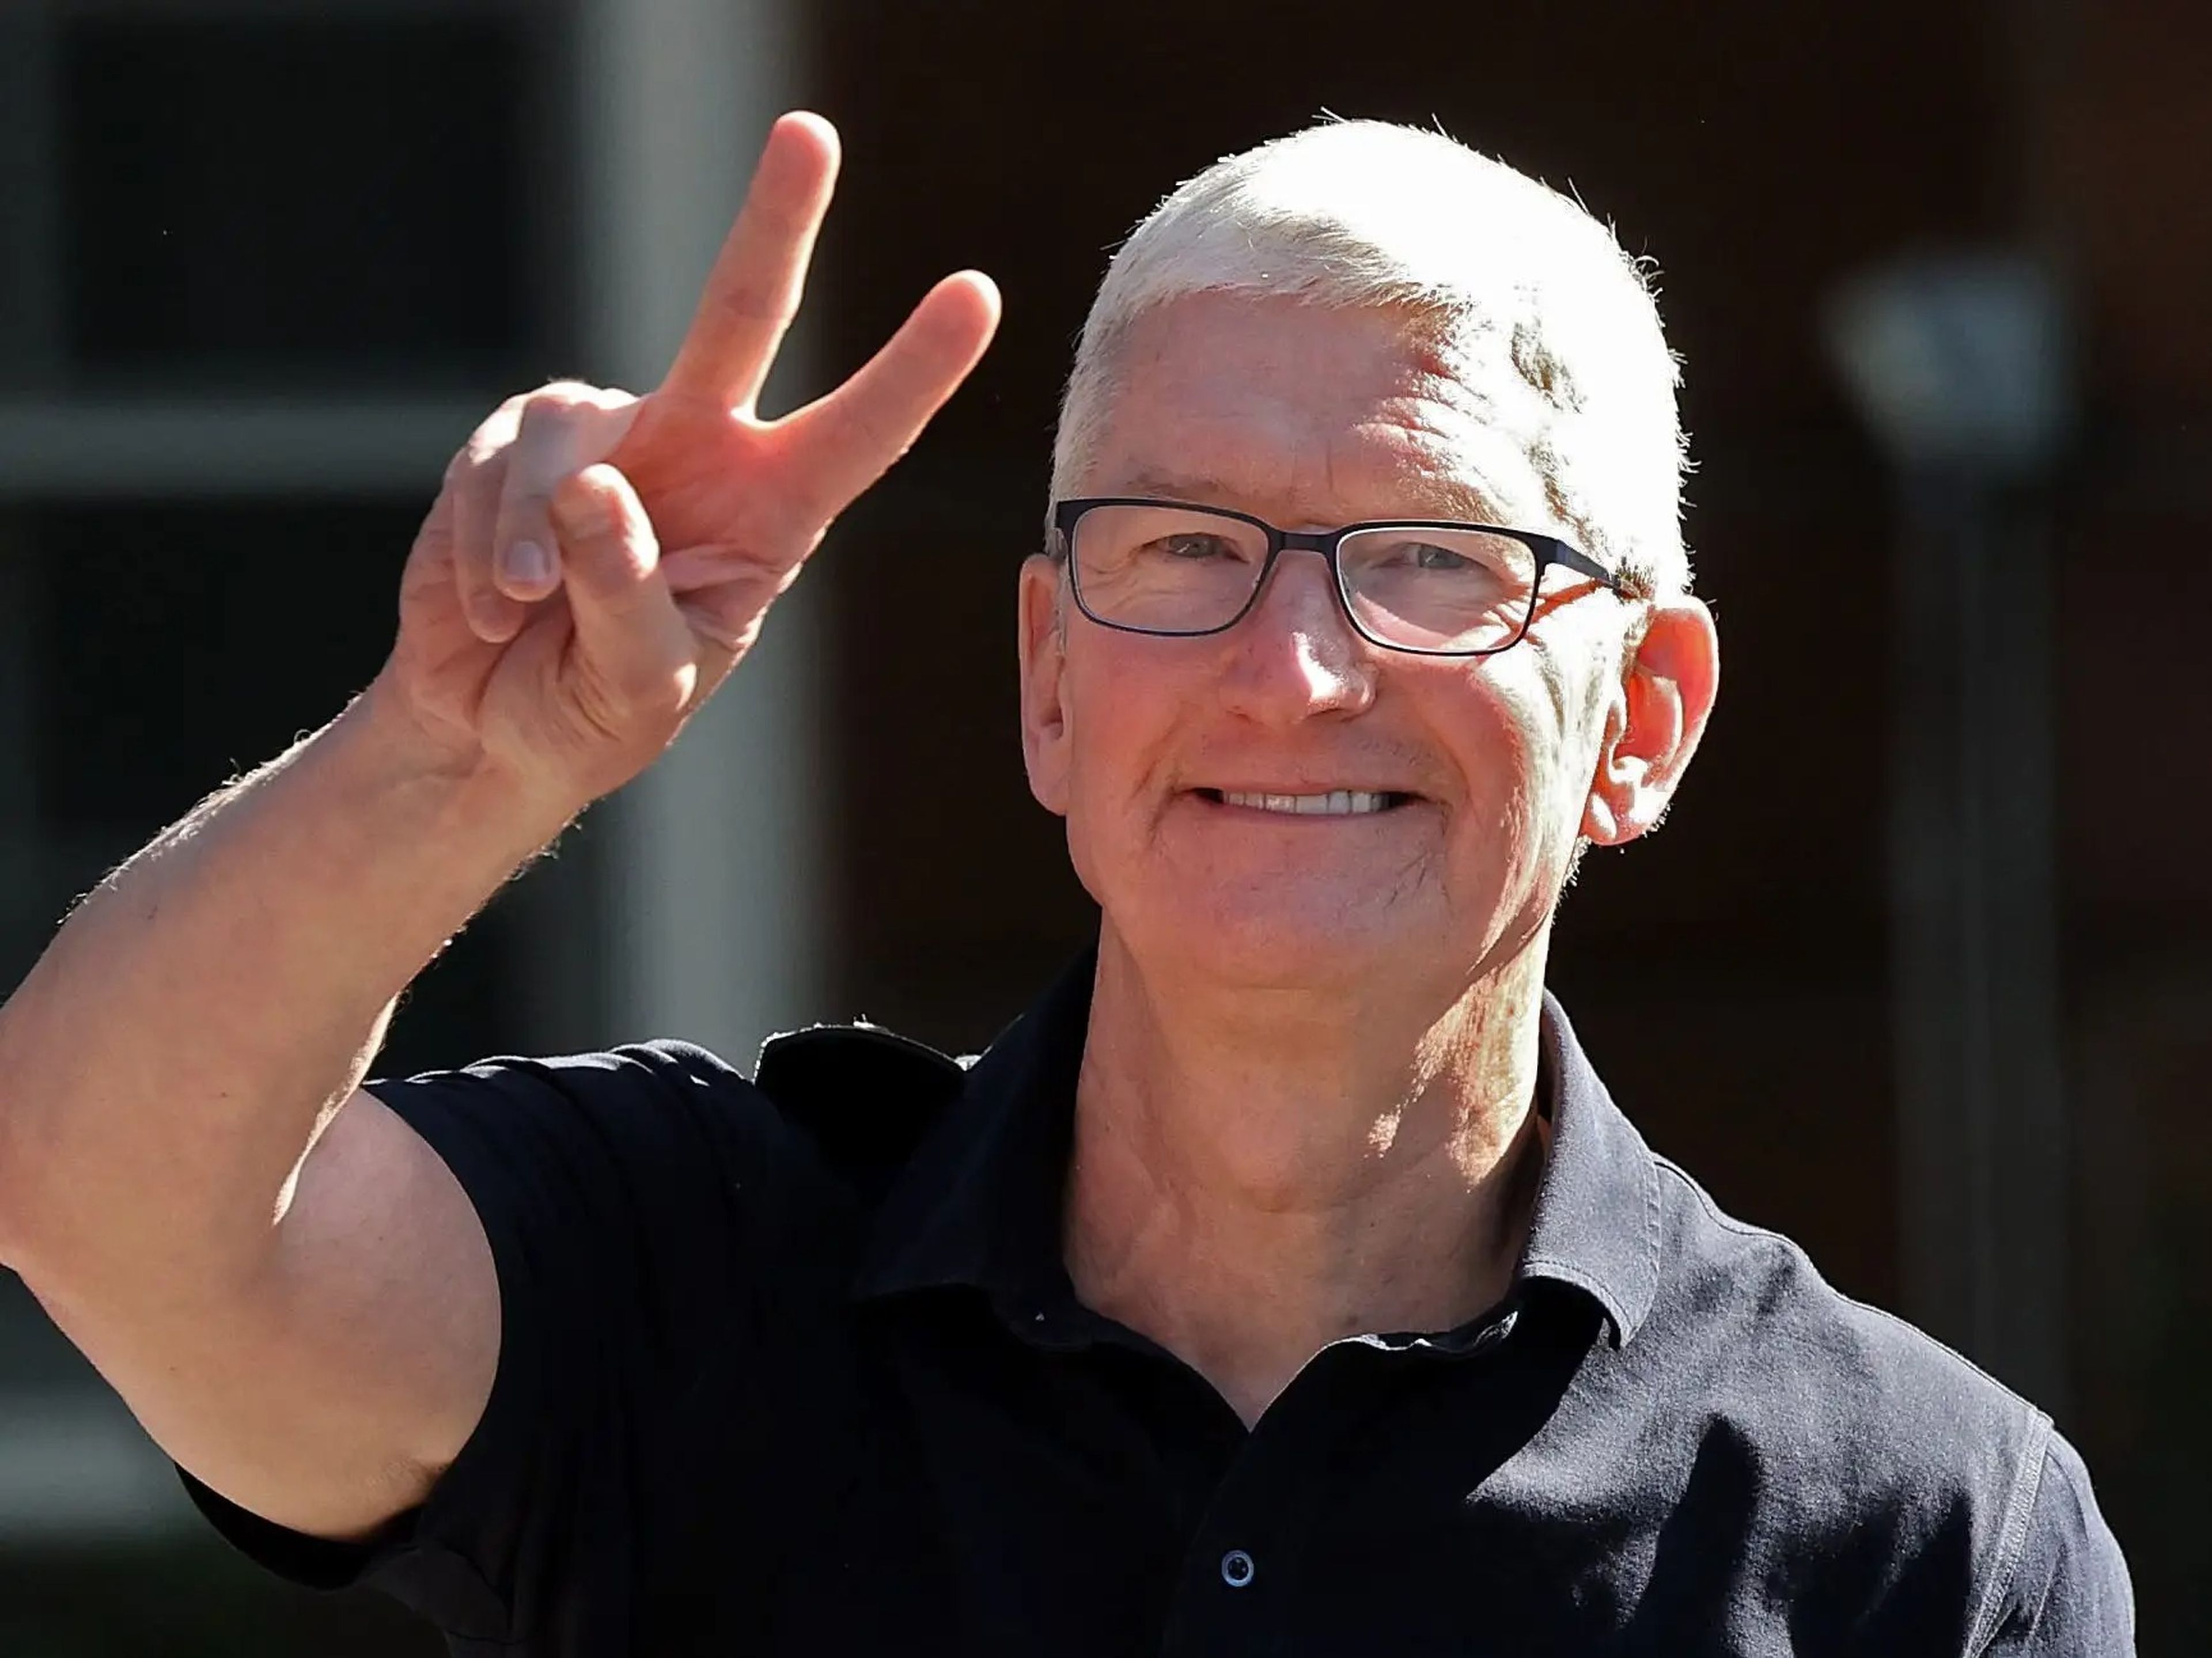 Tim Cook's hobbies include cycling and rock climbing.